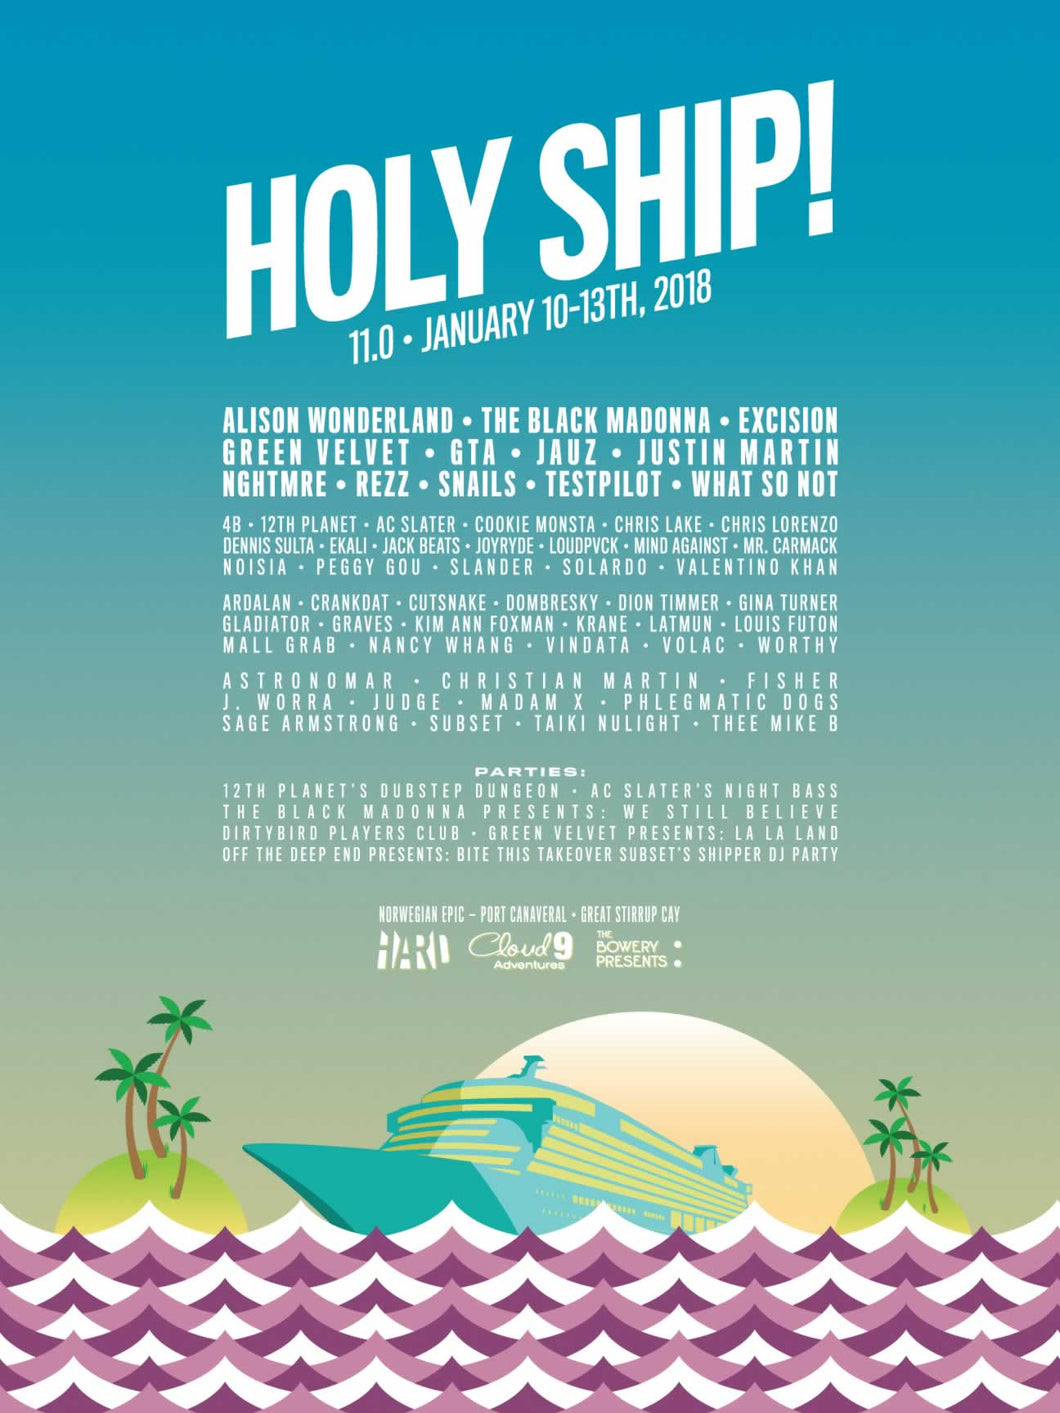 Holy Ship! 11.0 Poster